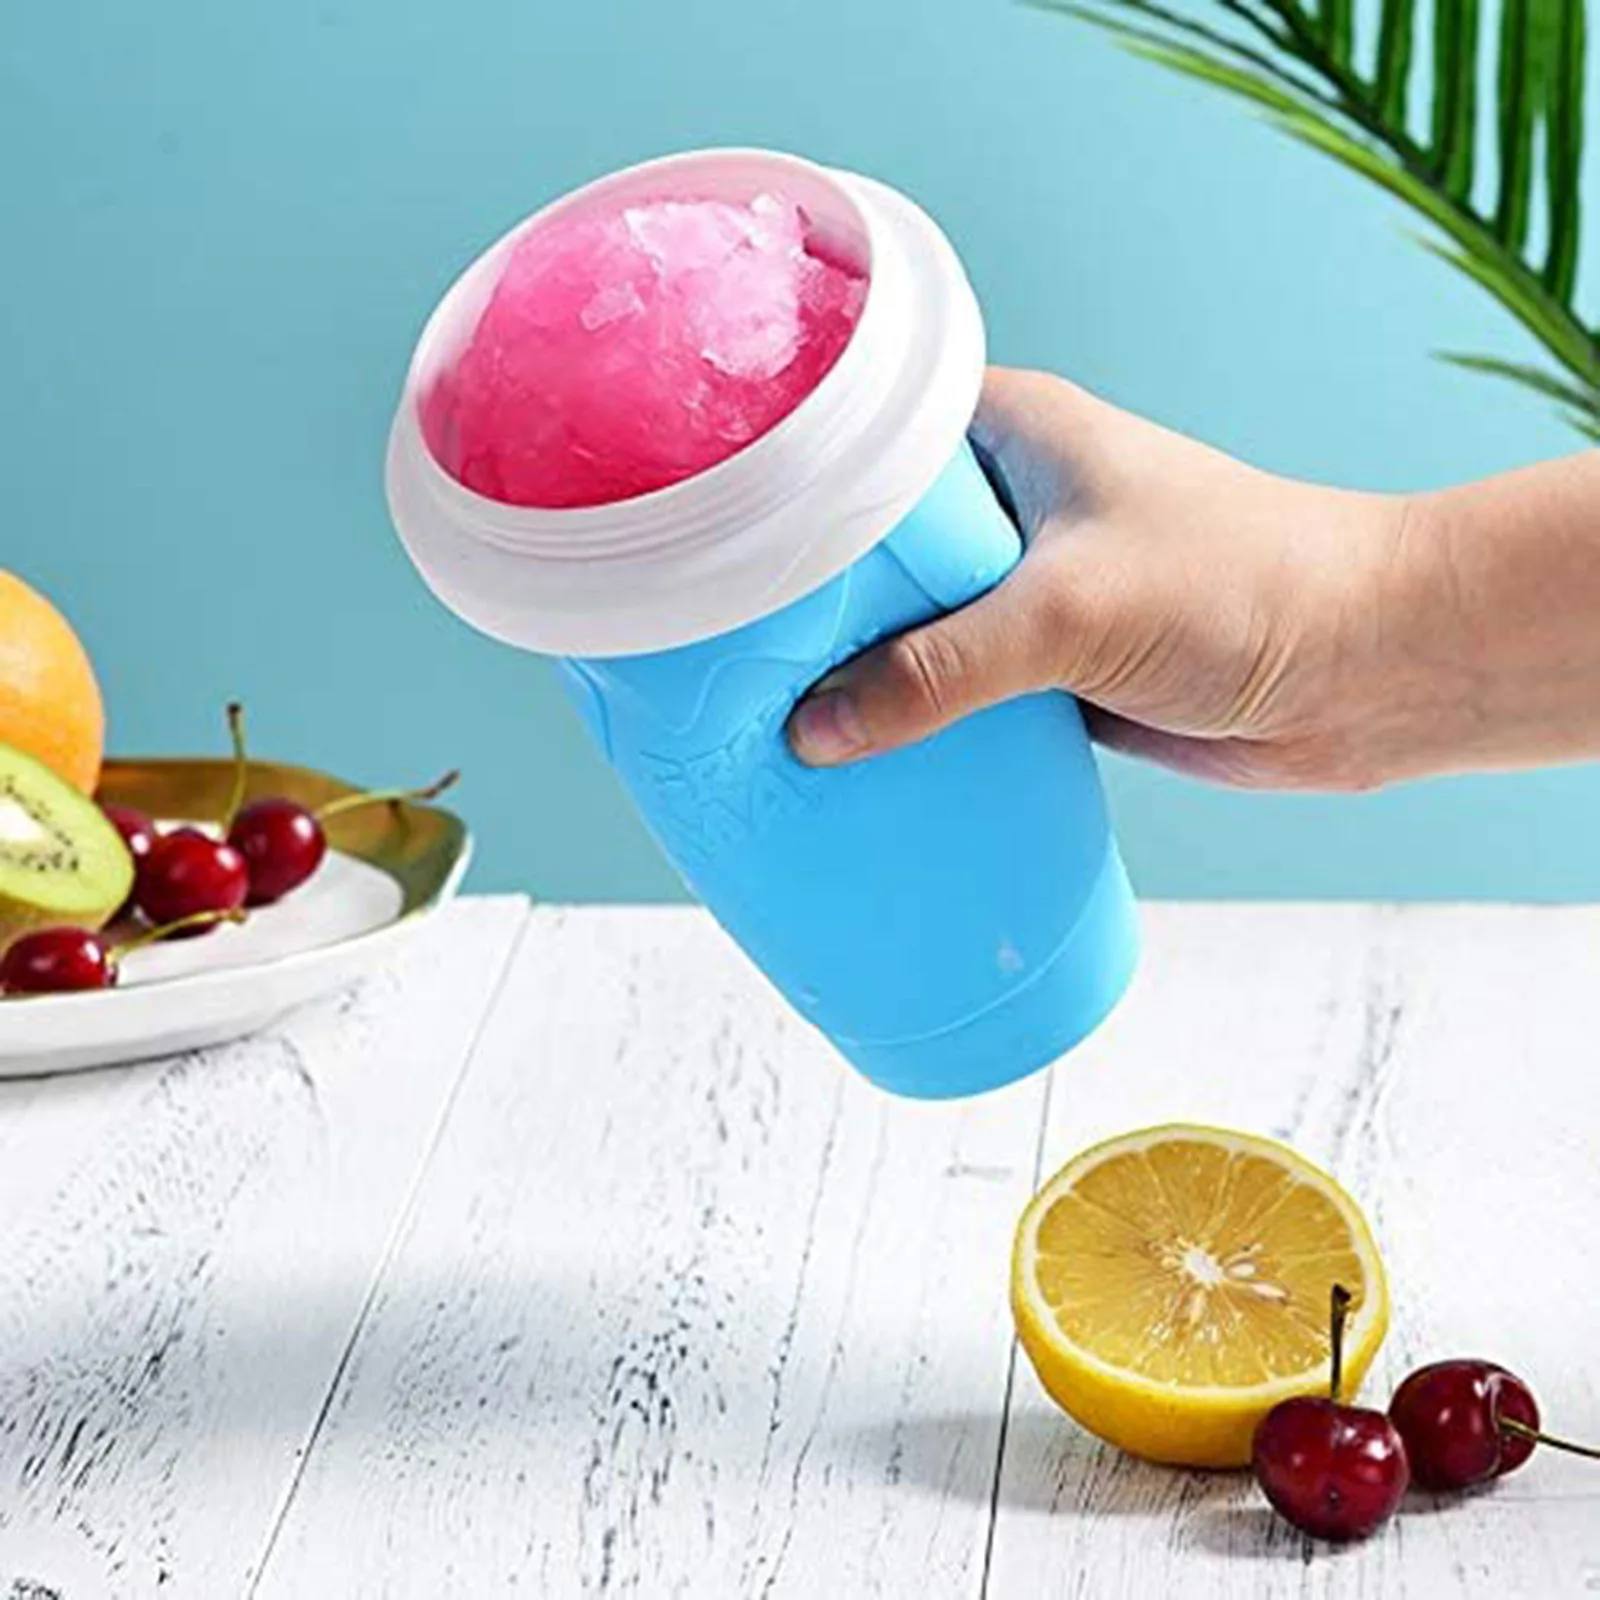 https://ae01.alicdn.com/kf/Se971fdab4a924869a3efe5aebee1eb93u/Slushie-Maker-Cup-Magic-Quick-Frozen-DIY-Smoothies-Cup-Double-Layer-Squeeze-Cup-Homemade-Milk-Shake.jpg